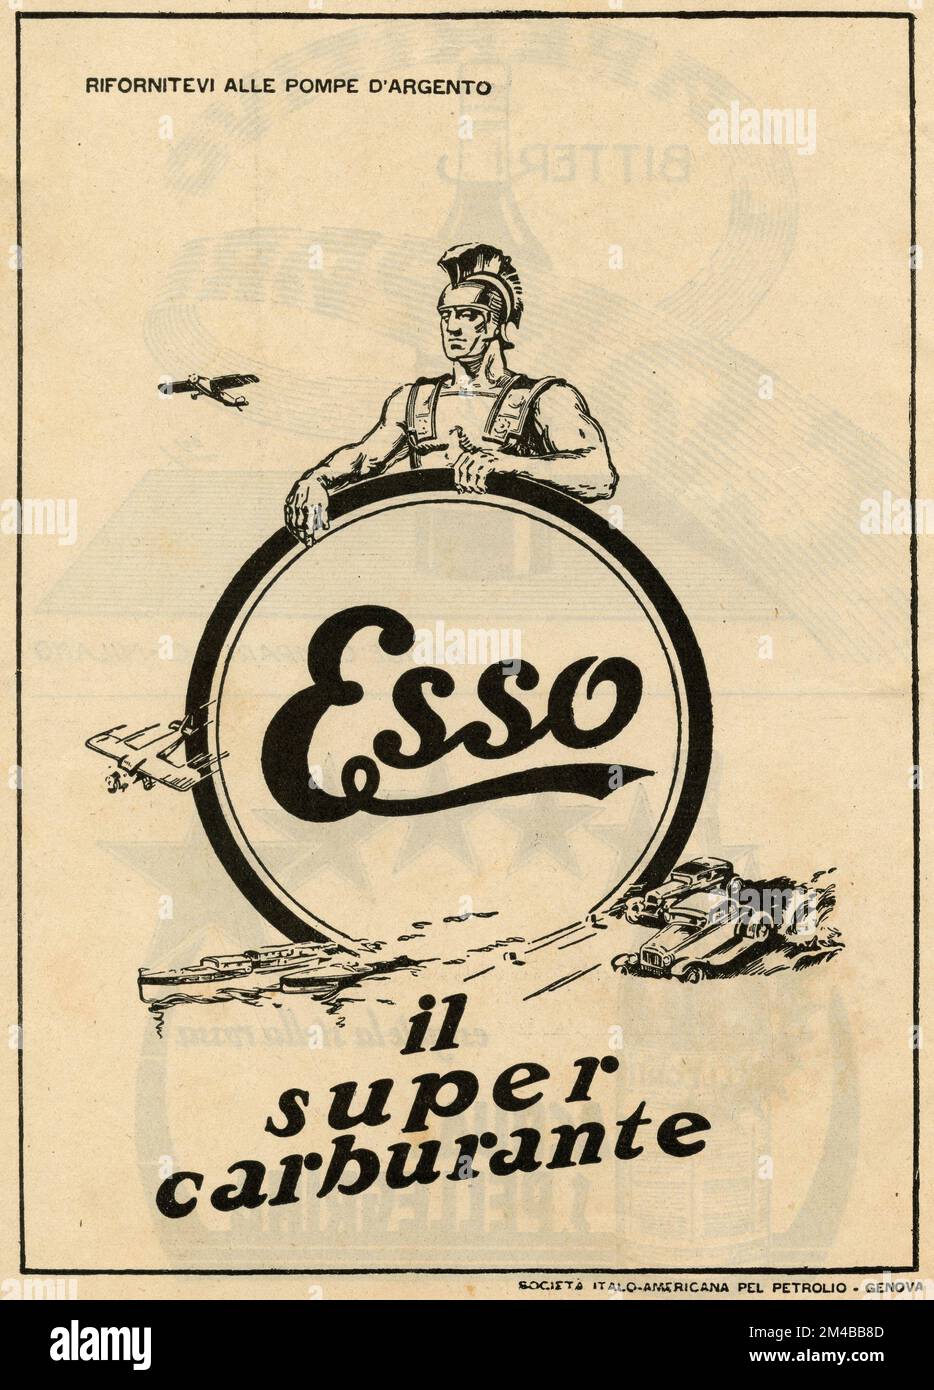 Vintage newspaper ad of Esso gasolines, Italy 1930s Stock Photo